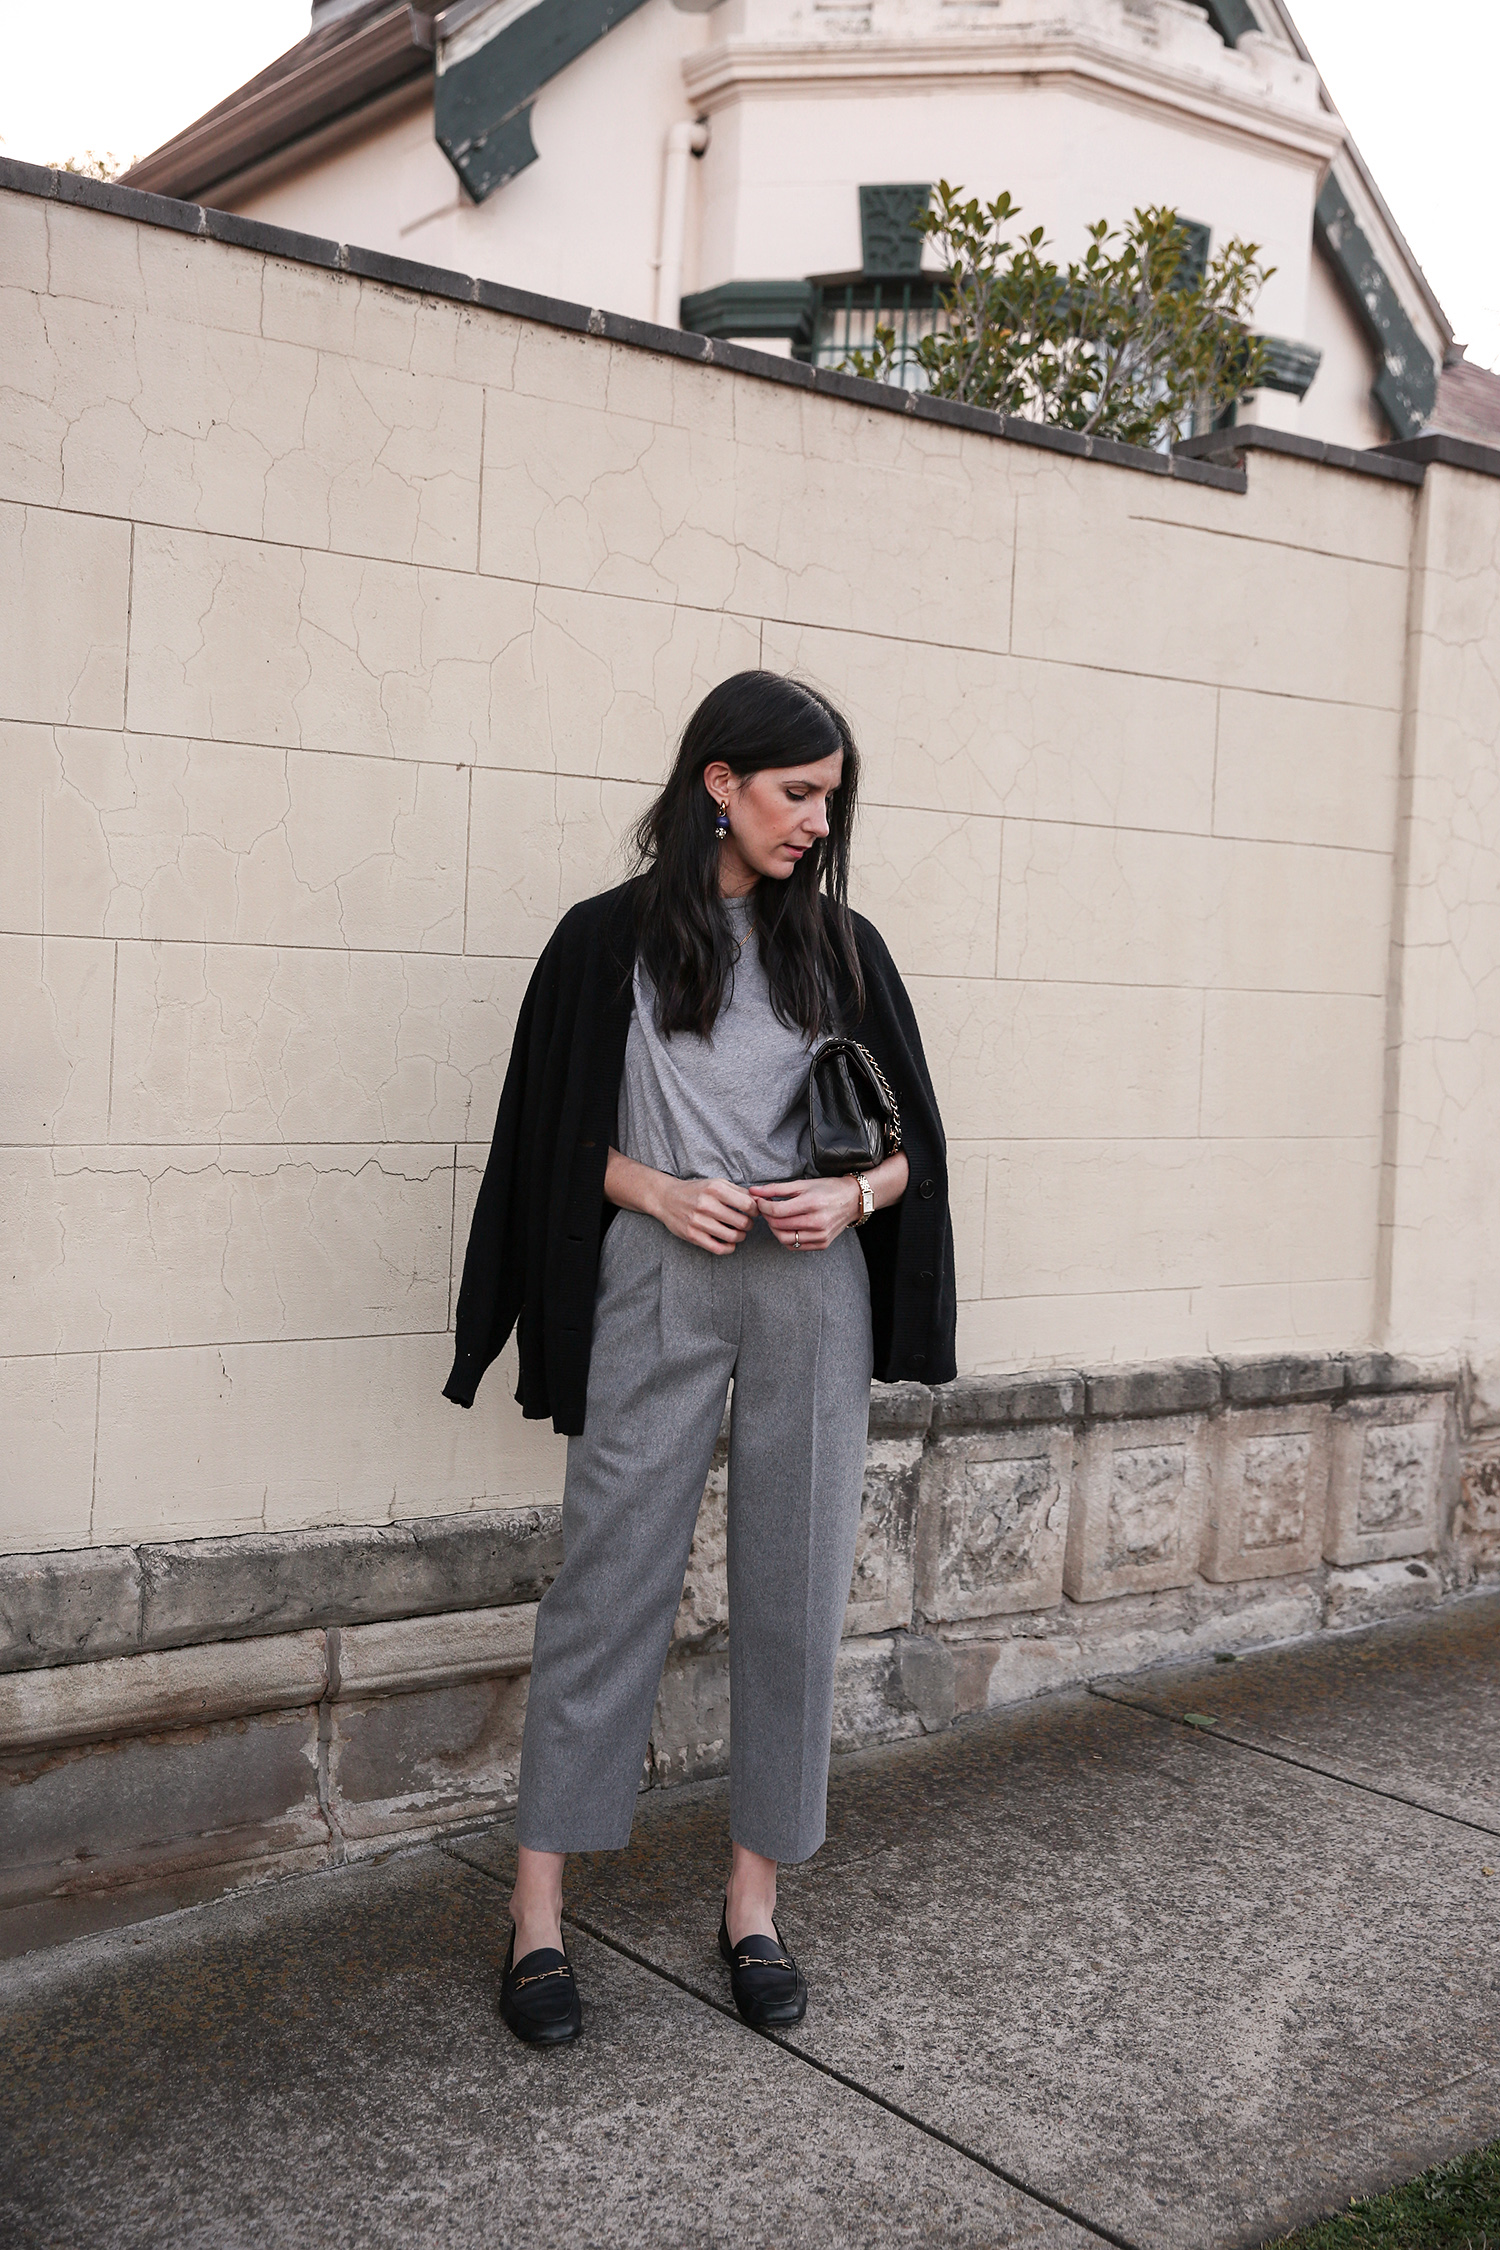 Jamie Lee of Mademoiselle wearing And Other Stories black cardigan and Acne Studios trea trousers